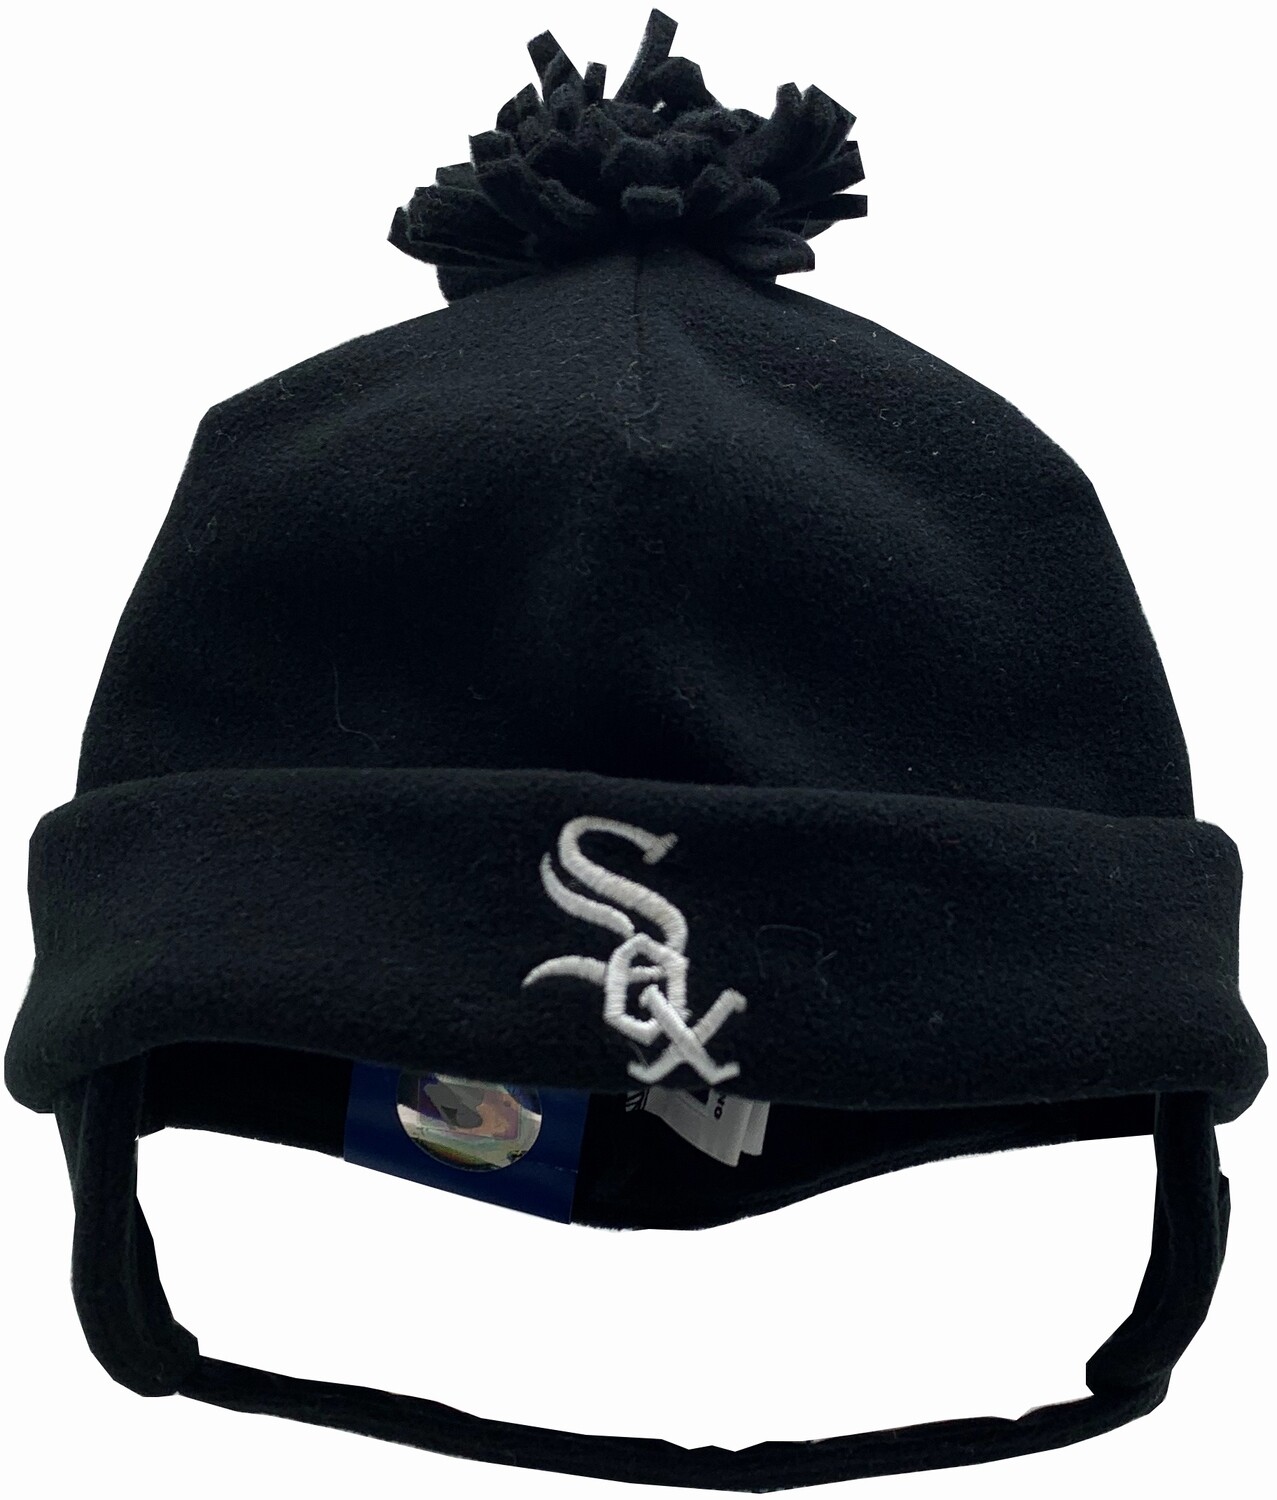 Chicago White Sox Toddler Knit Hat W/ Ear Flaps Black